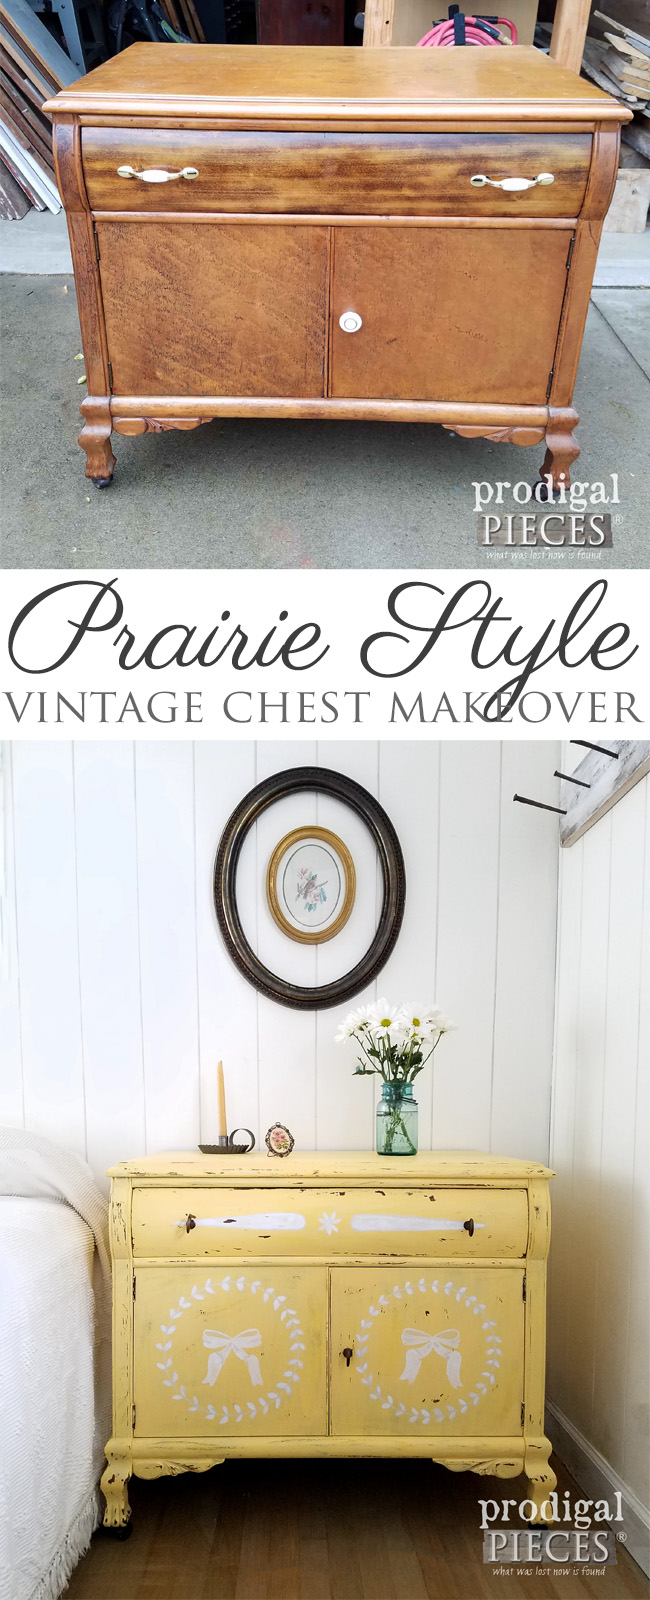 Prairie Style Vintage Chest Makeover by Larissa of Prodigal Pieces | prodigalpieces.com